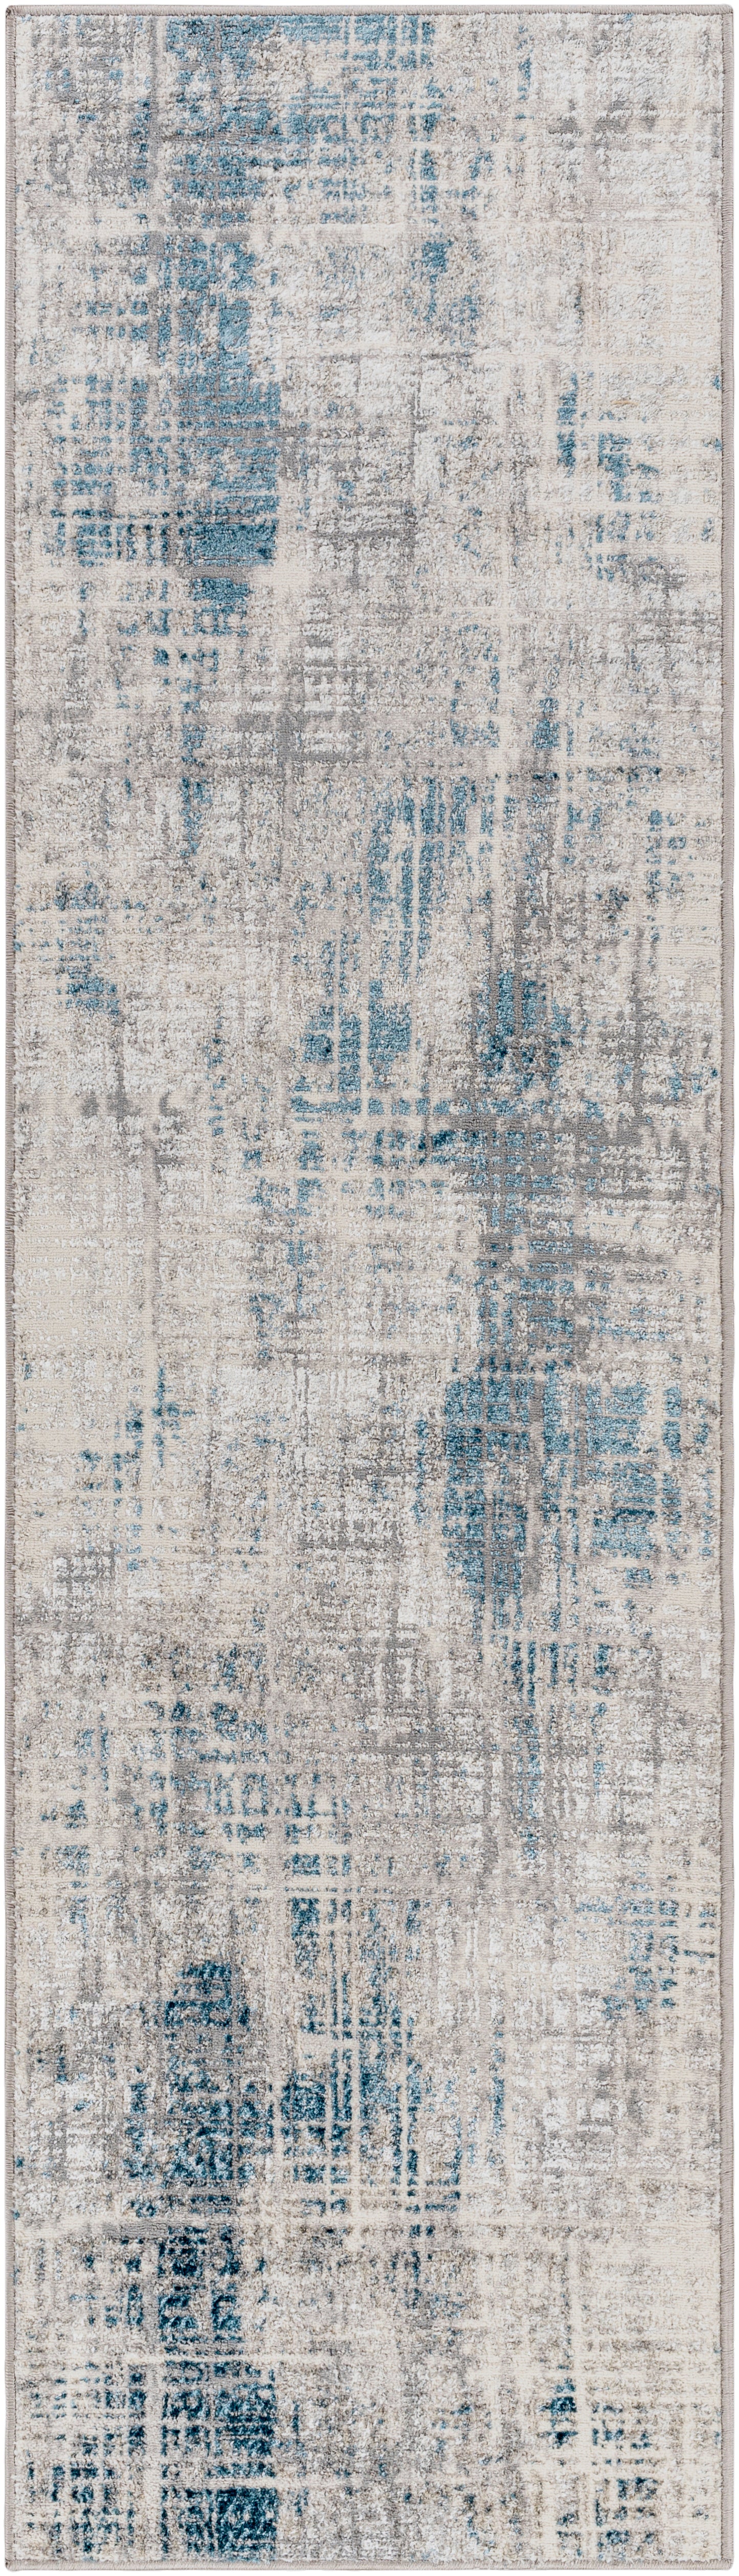 Firenze 30318 Machine Woven Synthetic Blend Indoor Area Rug by Surya Rugs